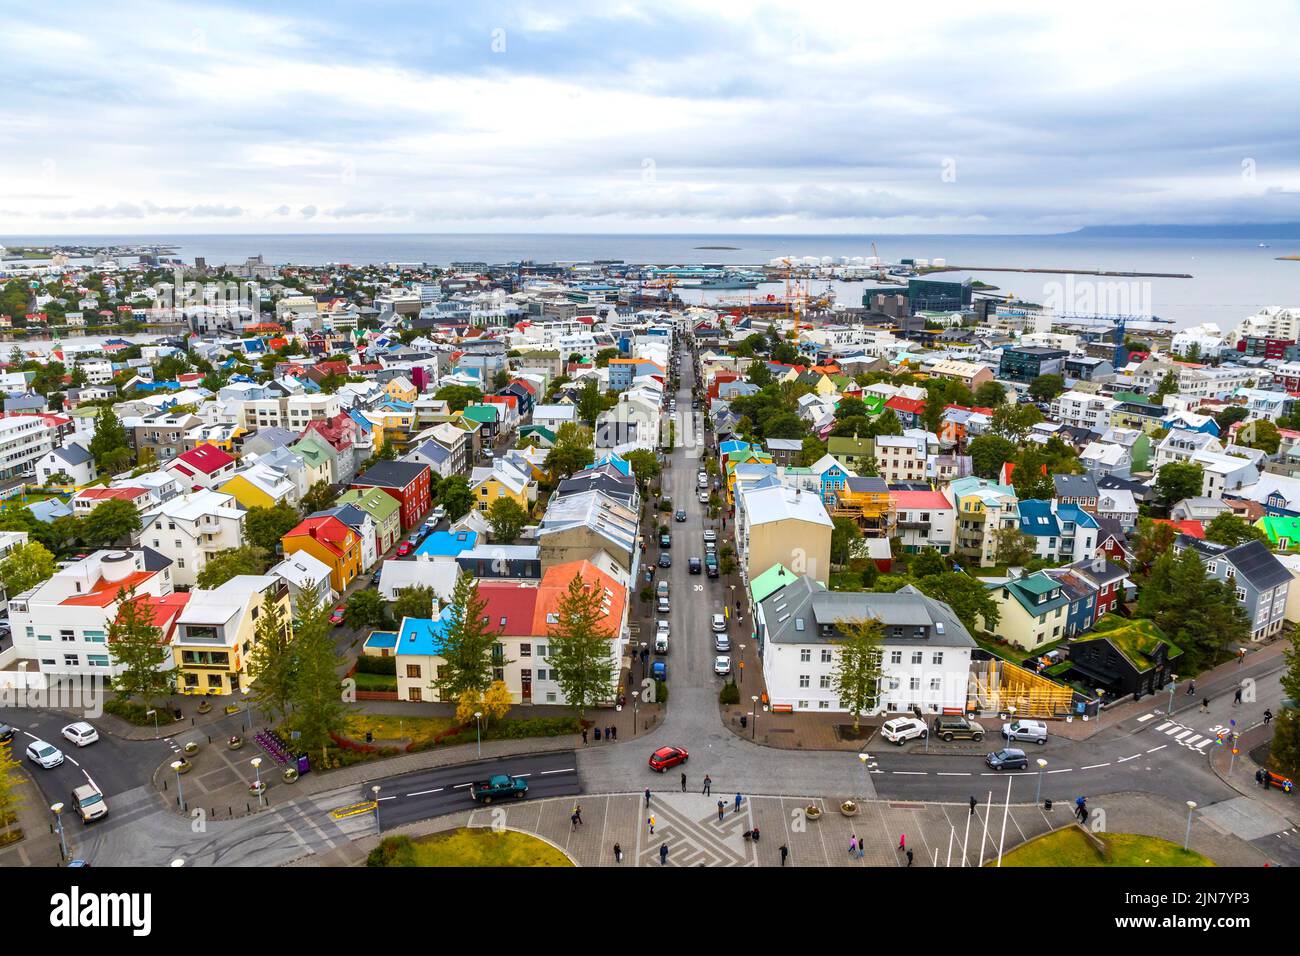 Skyline aerial view of Reykjavik city, Iceland. Skolavordustigur street, downtown, central streets, harbor and ocean scenery beyond the city Stock Photo